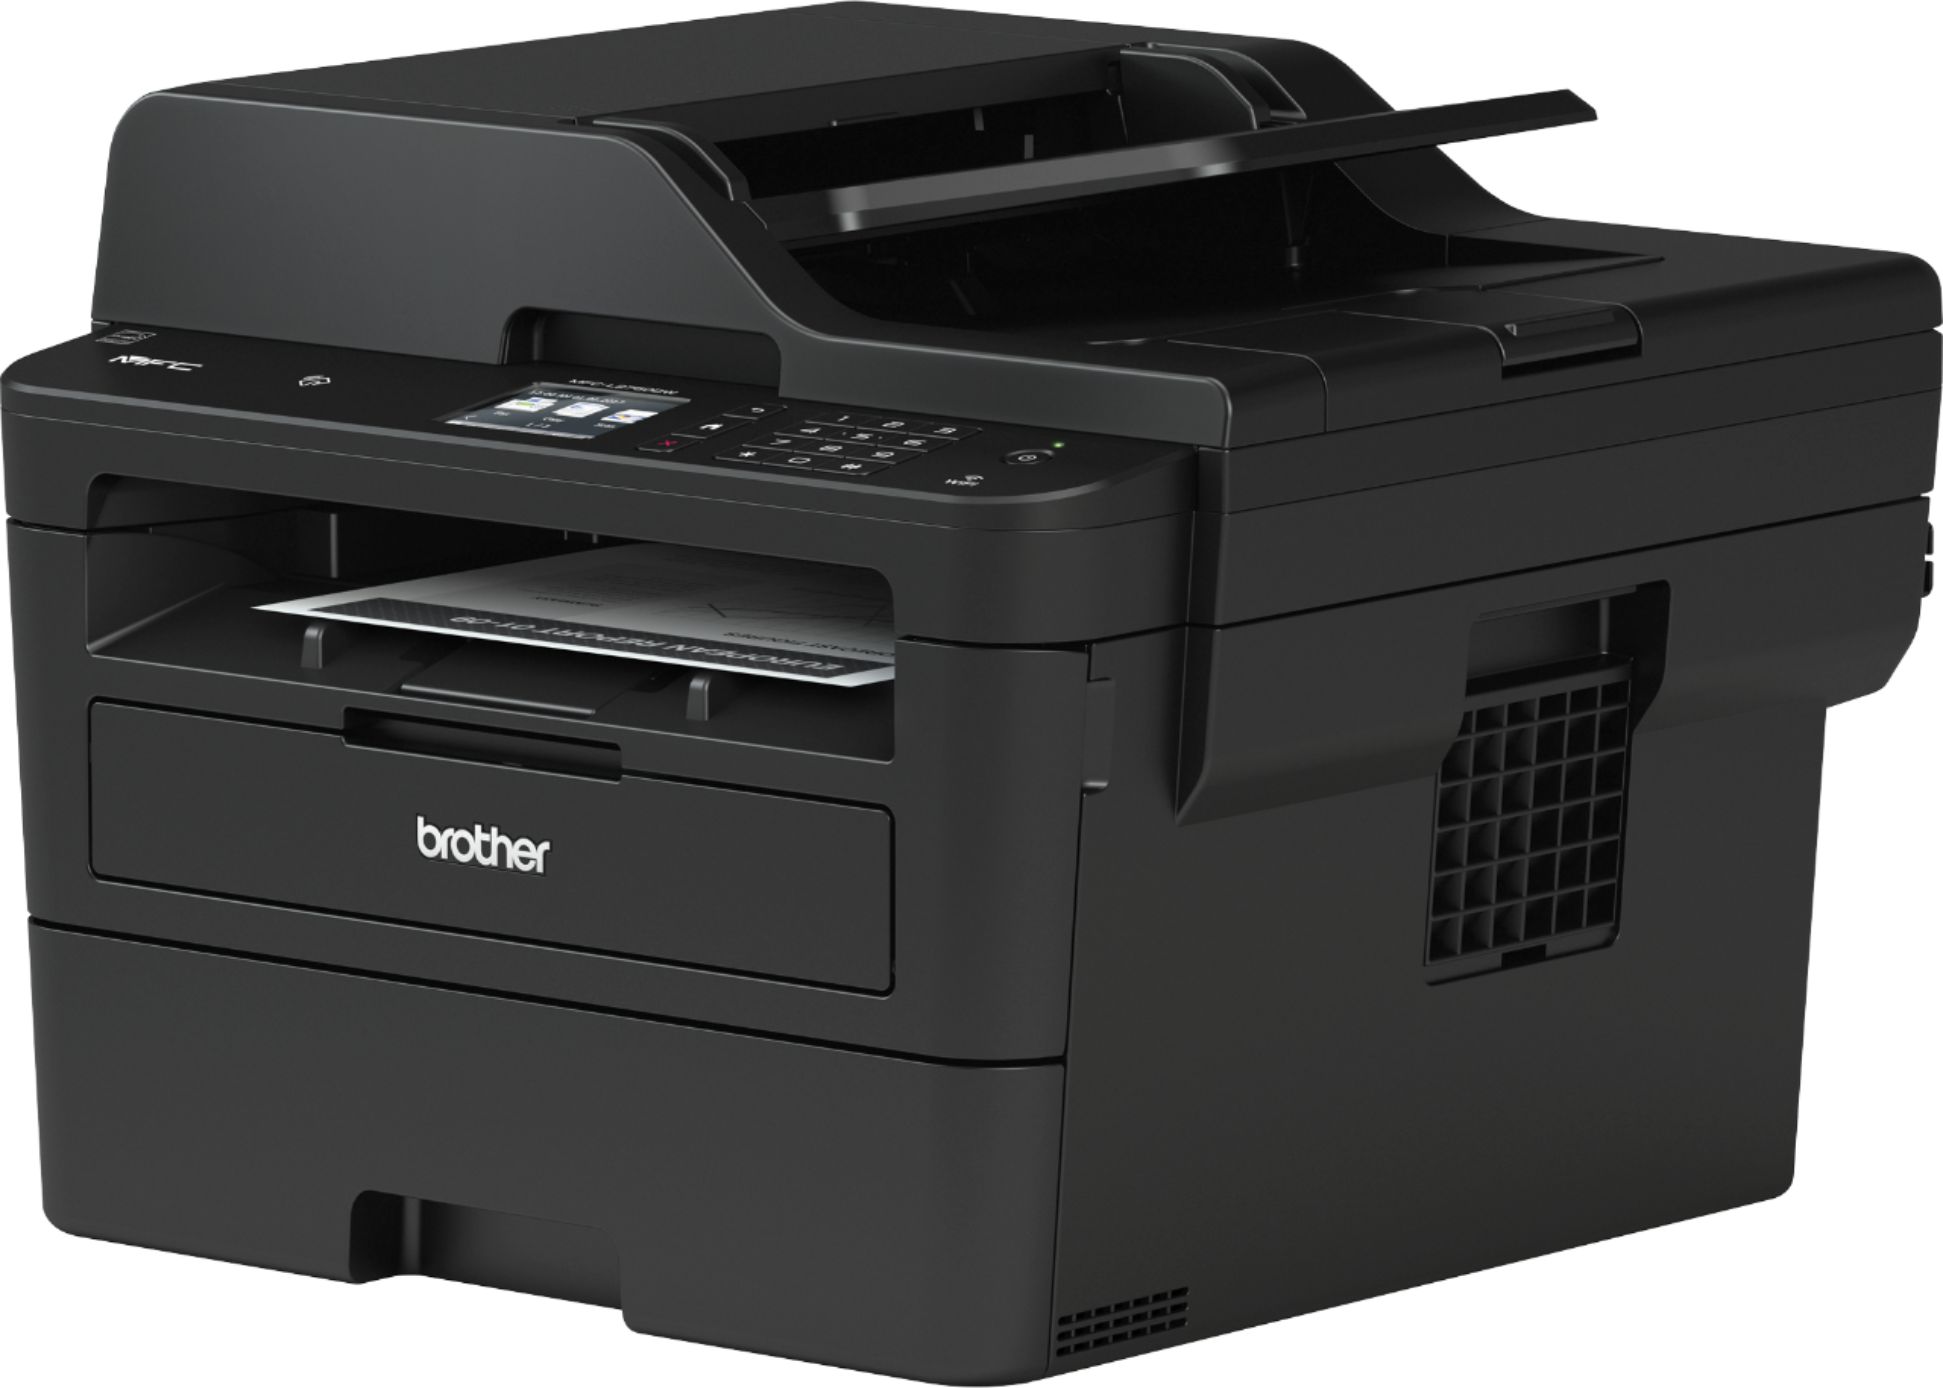 Left View: Canon - imageCLASS D570 Wireless Black-and-White All-In-One Laser Printer - Black